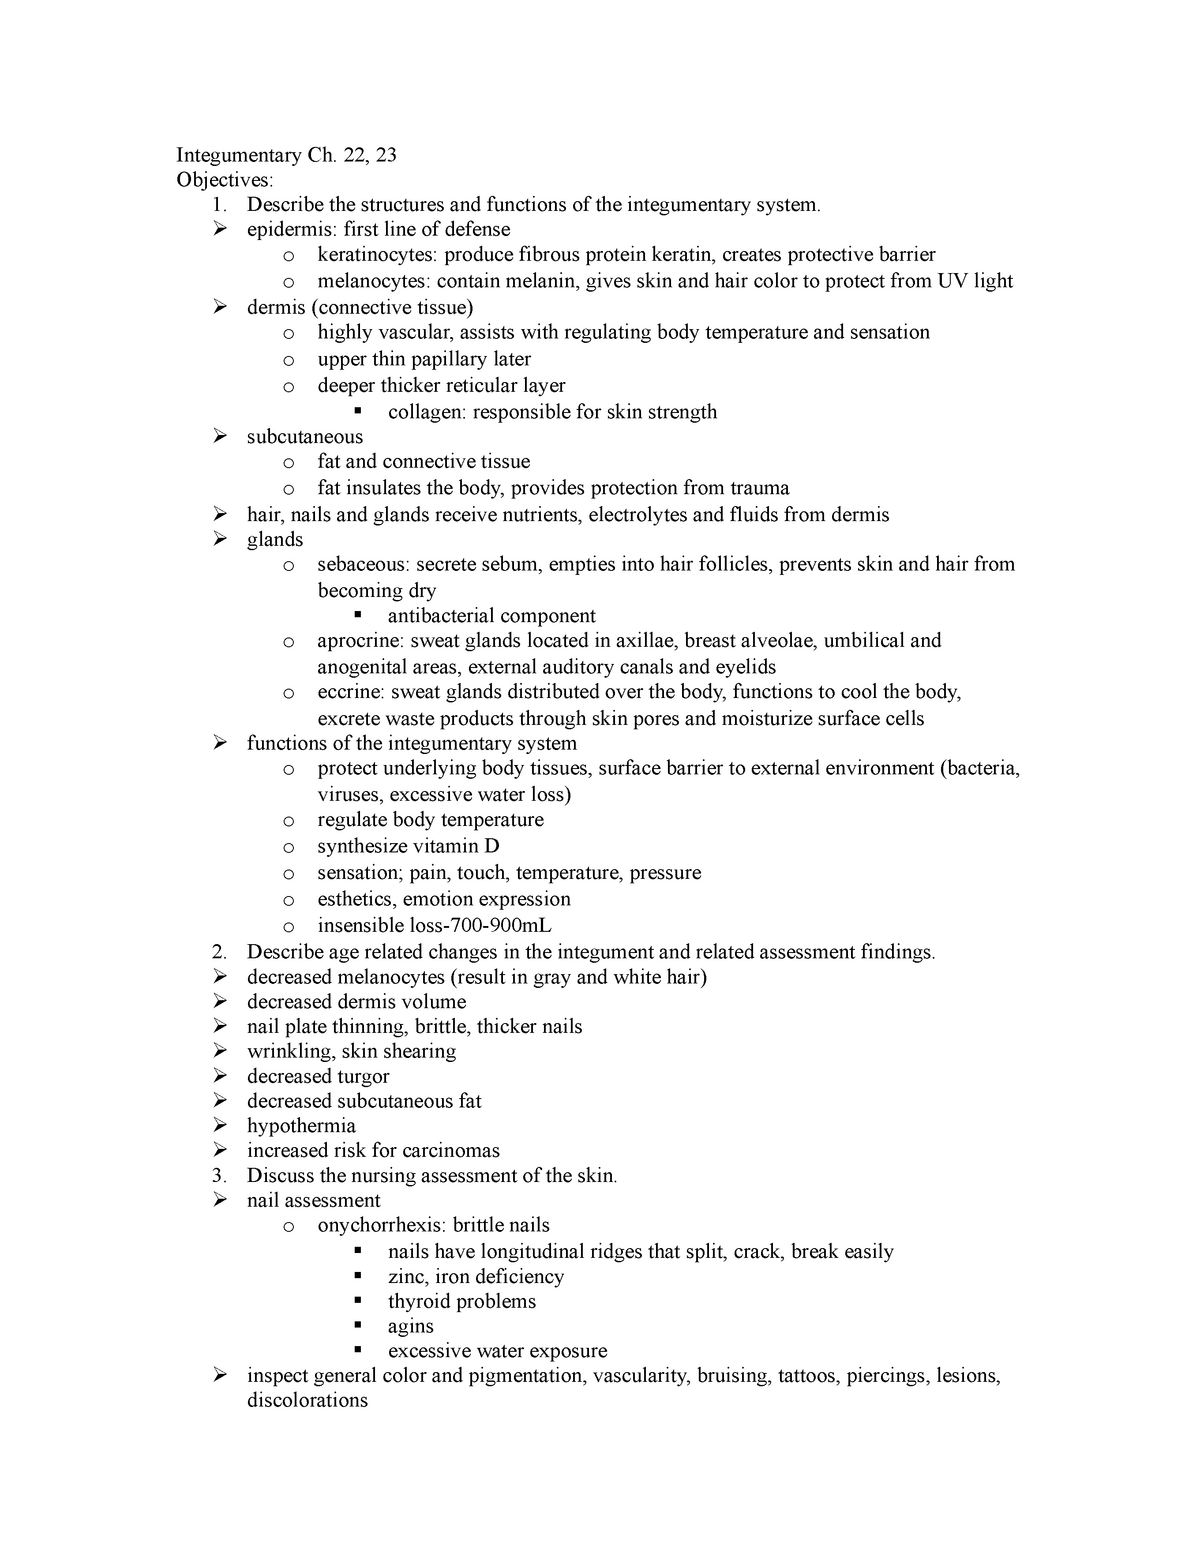 Burns - Lecture notes Ch 22-23 - Integumentary Ch. 22, 23 Objectives: 1 ...